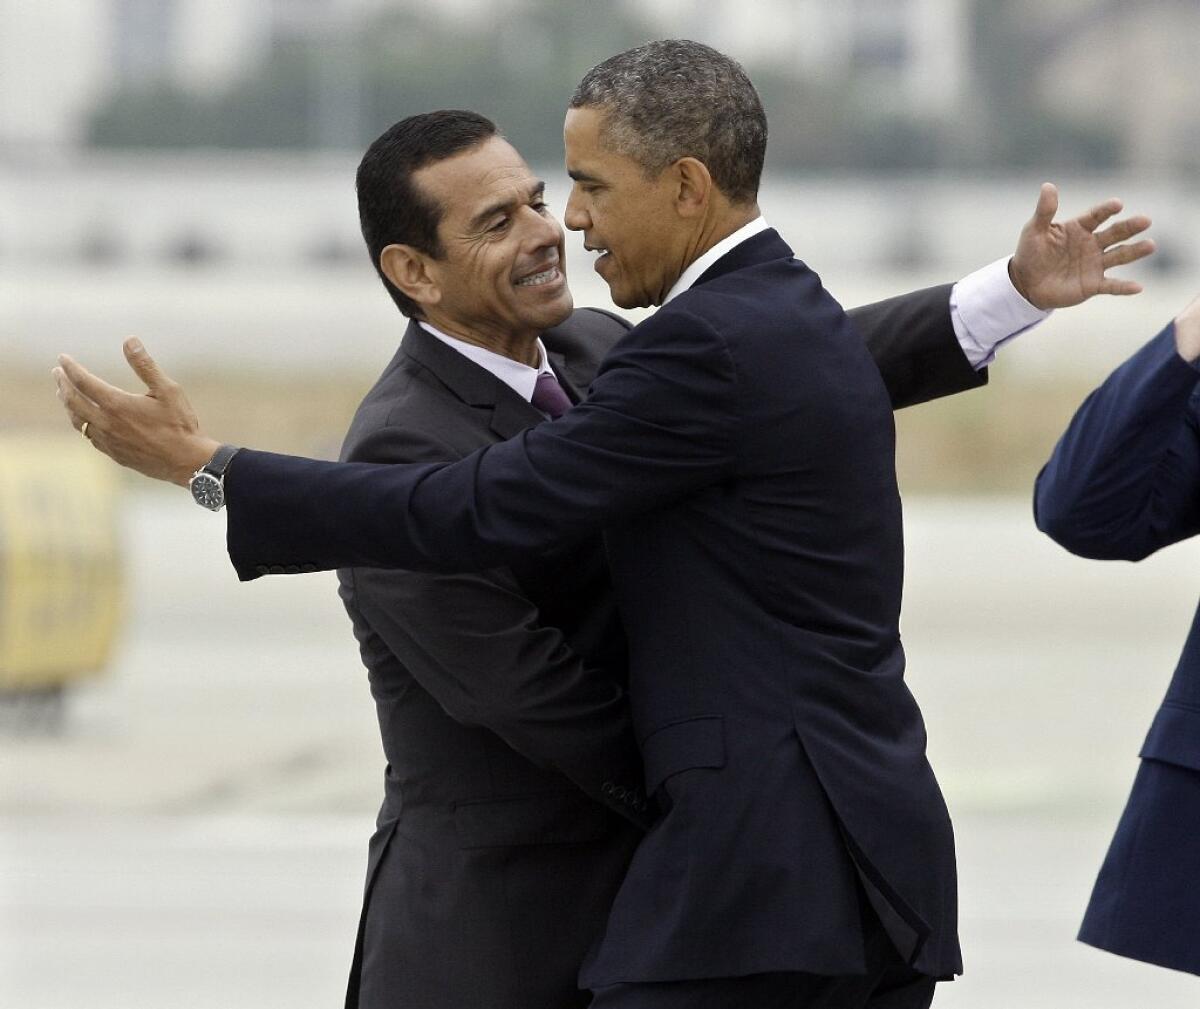 Antonio Villaraigosa and President Obama. Didn't the former mayor used to look out for the little guy?